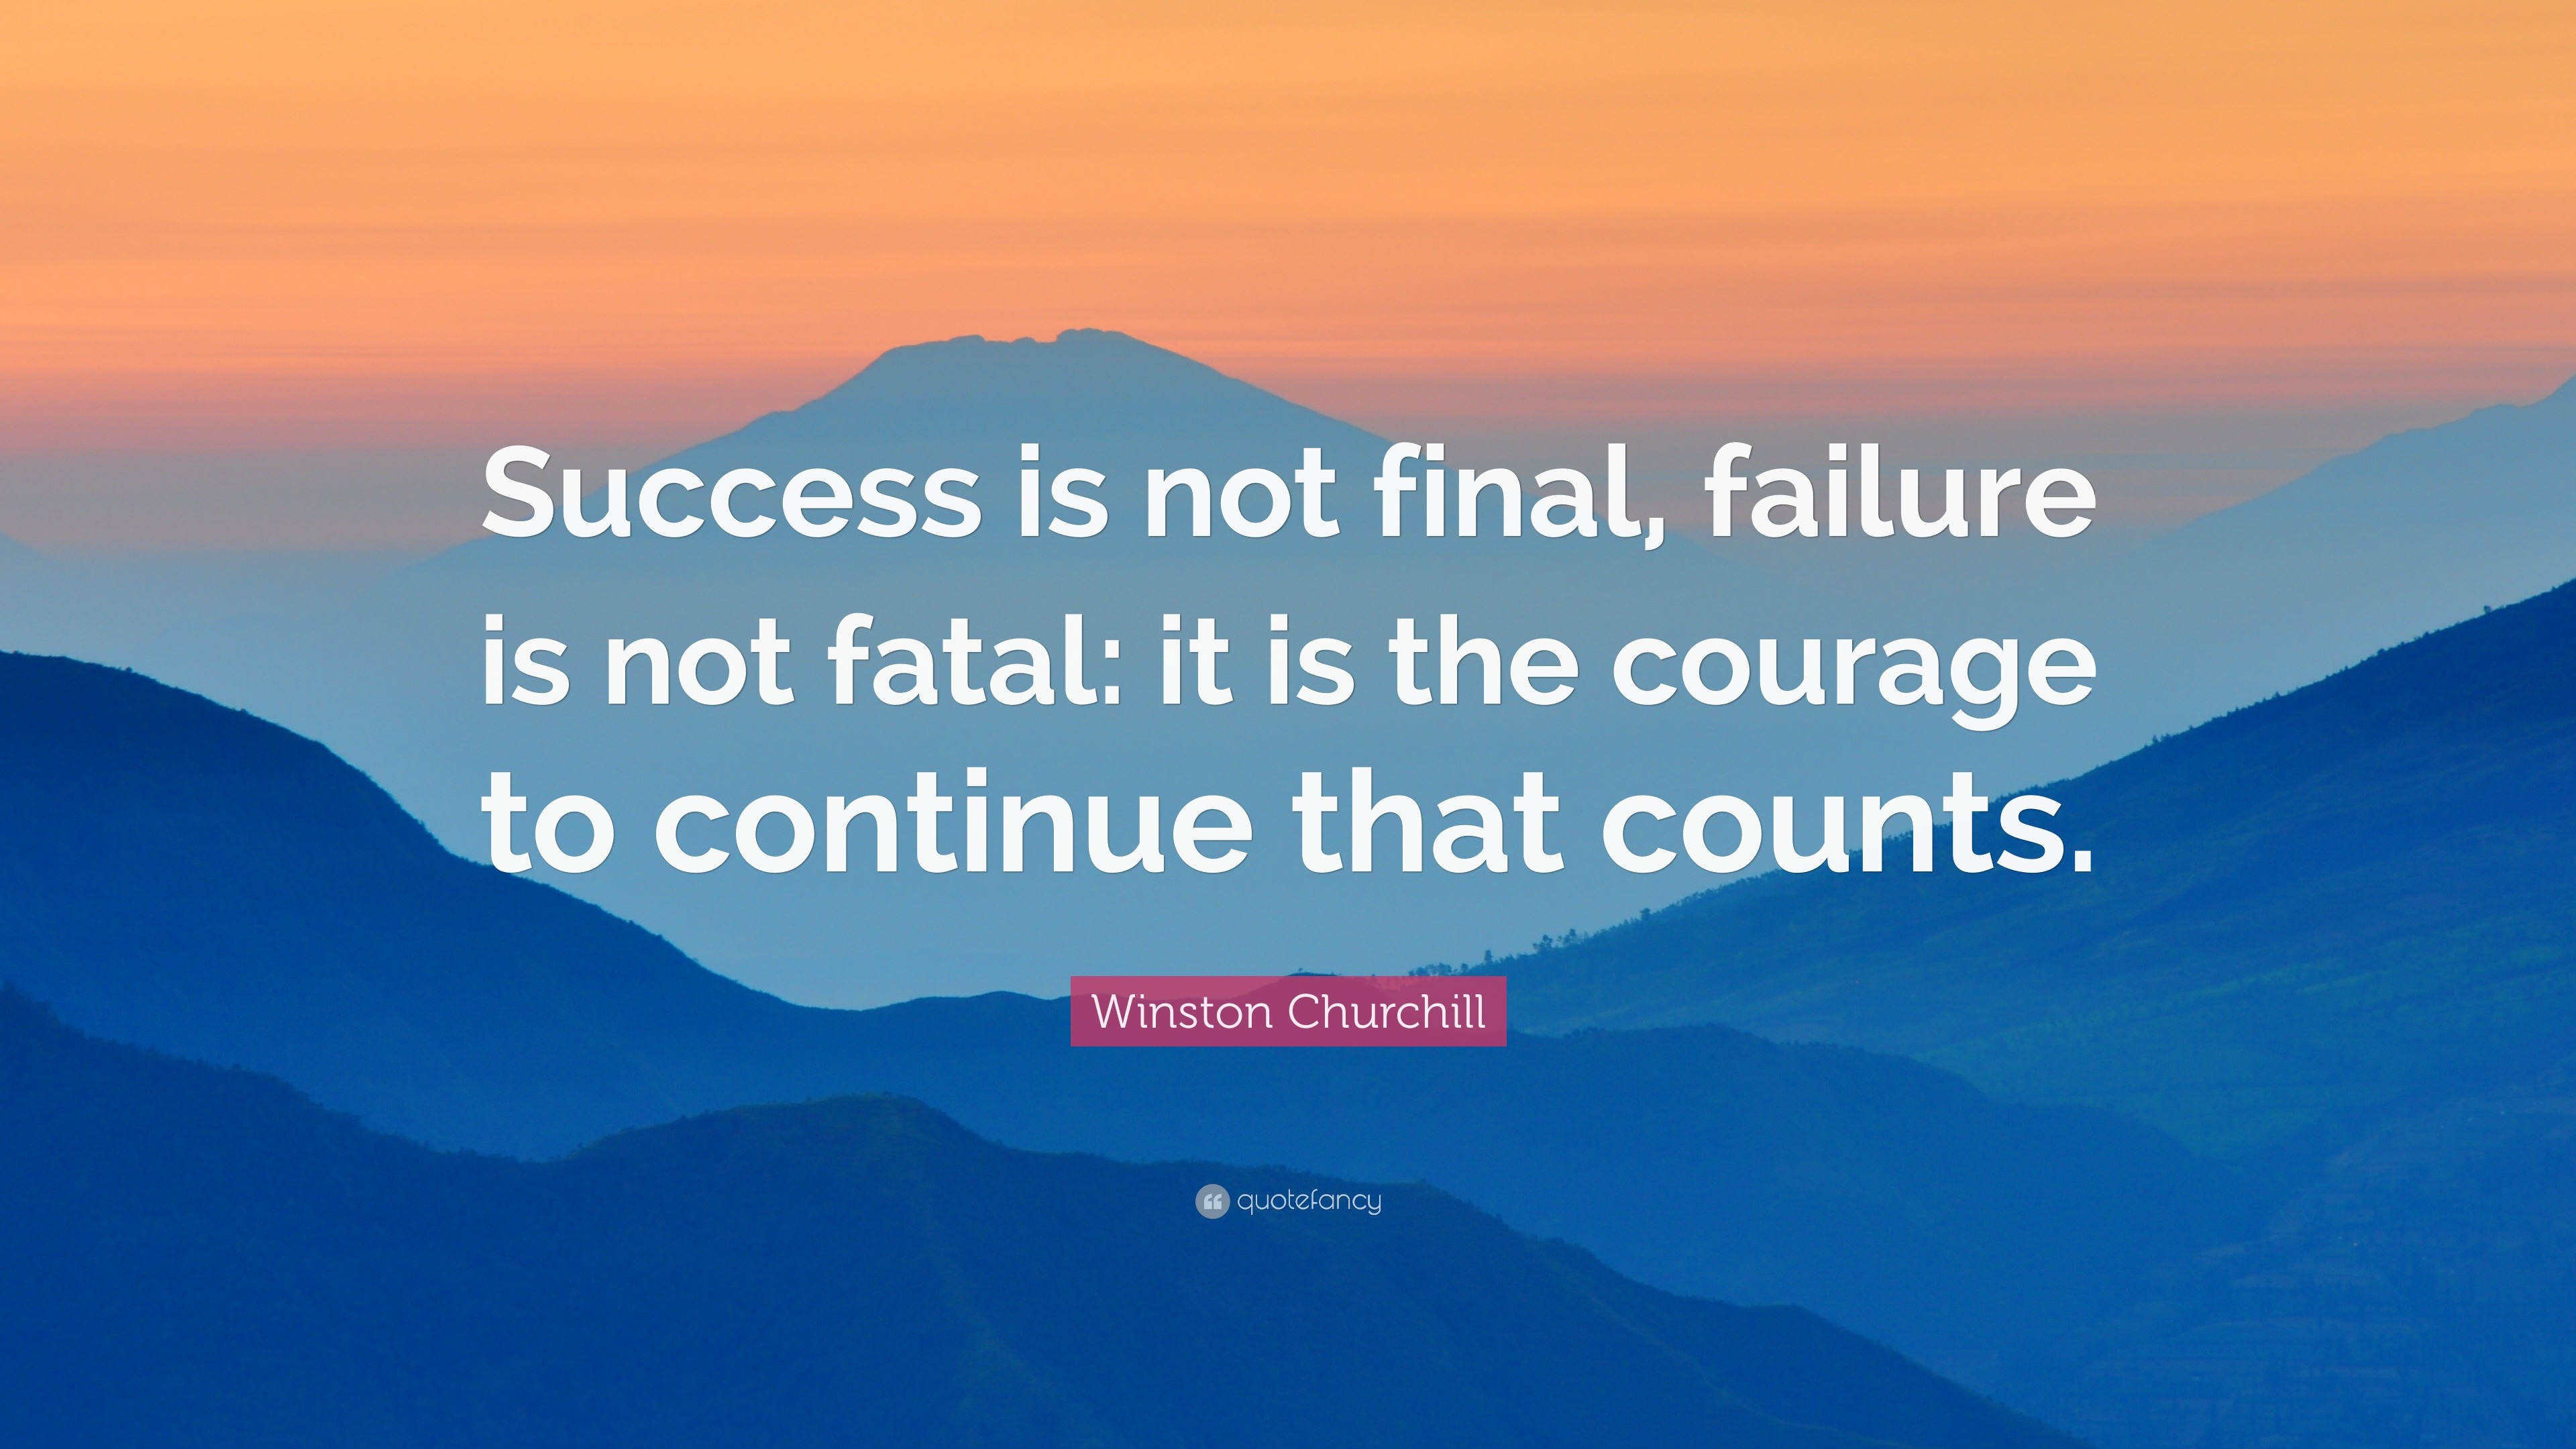 23710-Winston-Churchill-Quote-Success-is-not-final-failure-is-not-fatal.jpg